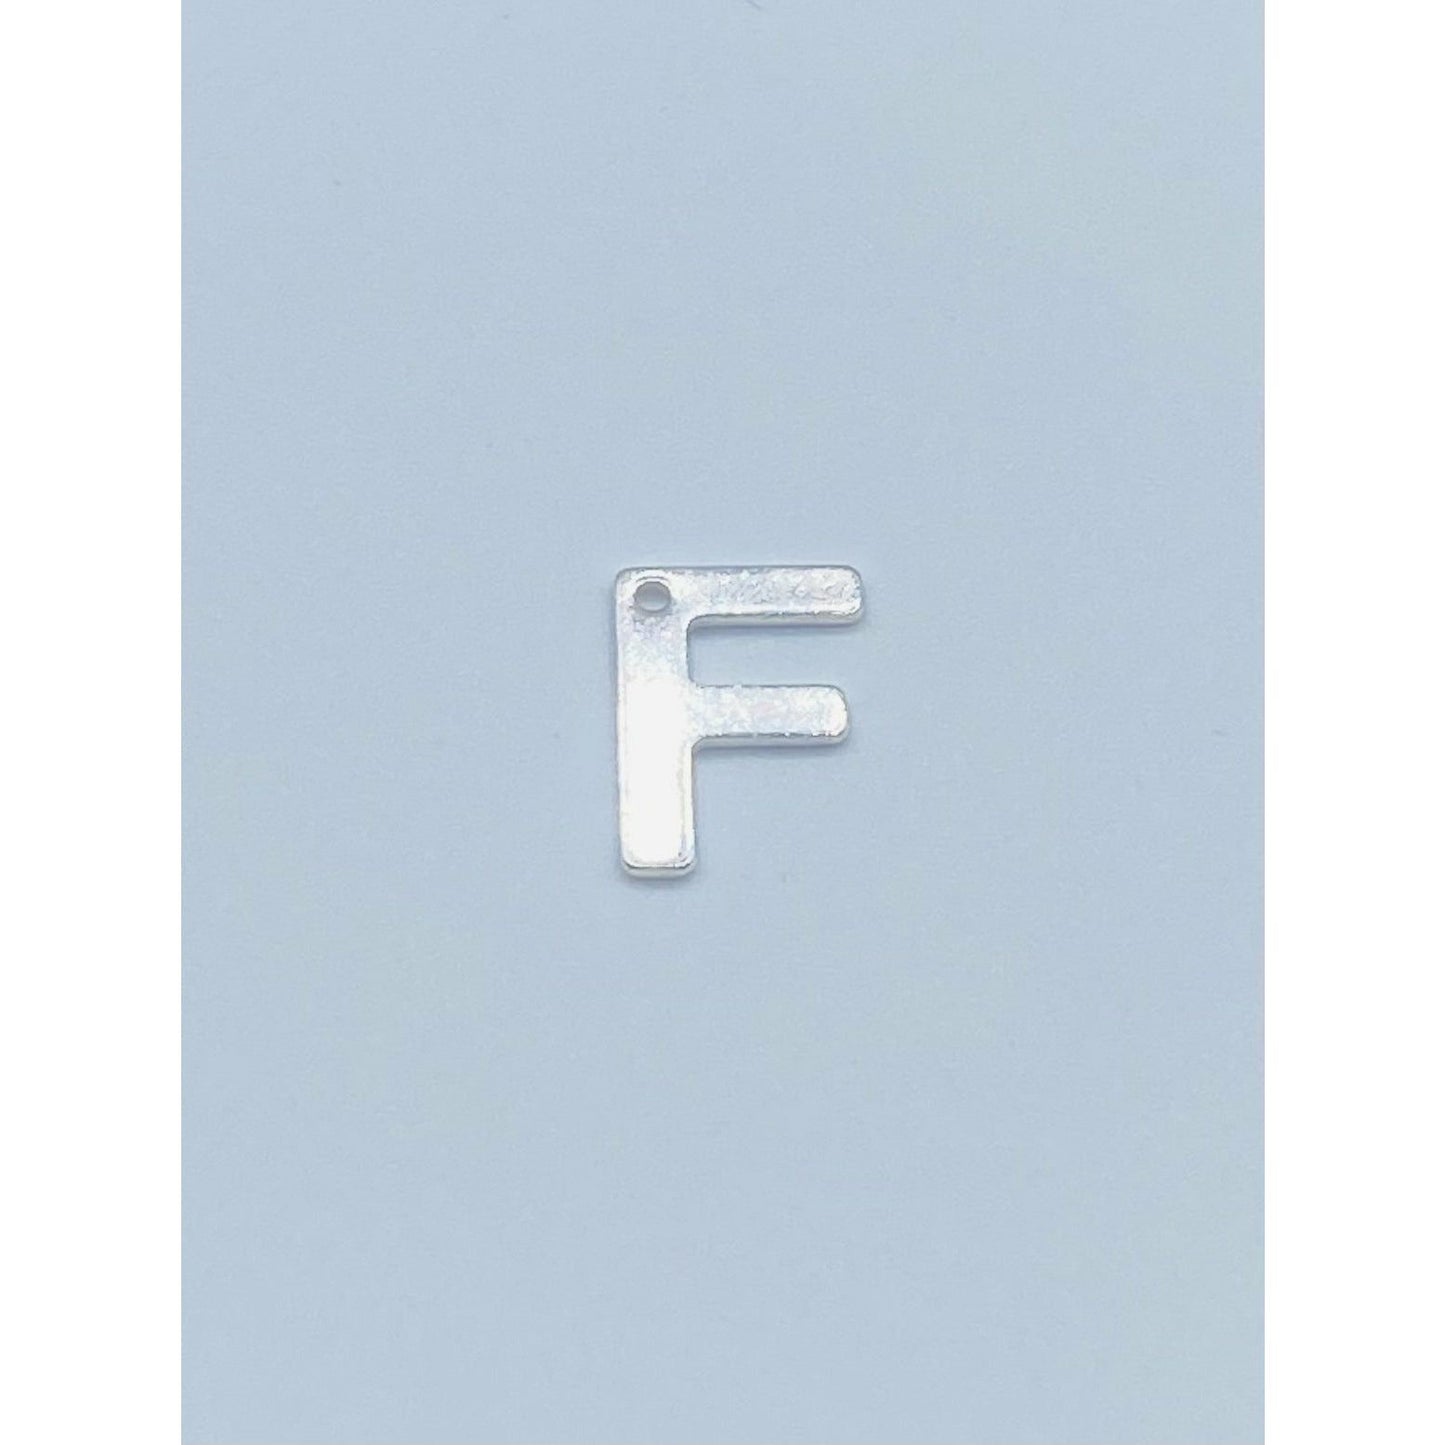 EXPRESS YOURSELF A-H BLOCK LETTER EARRING CHARM